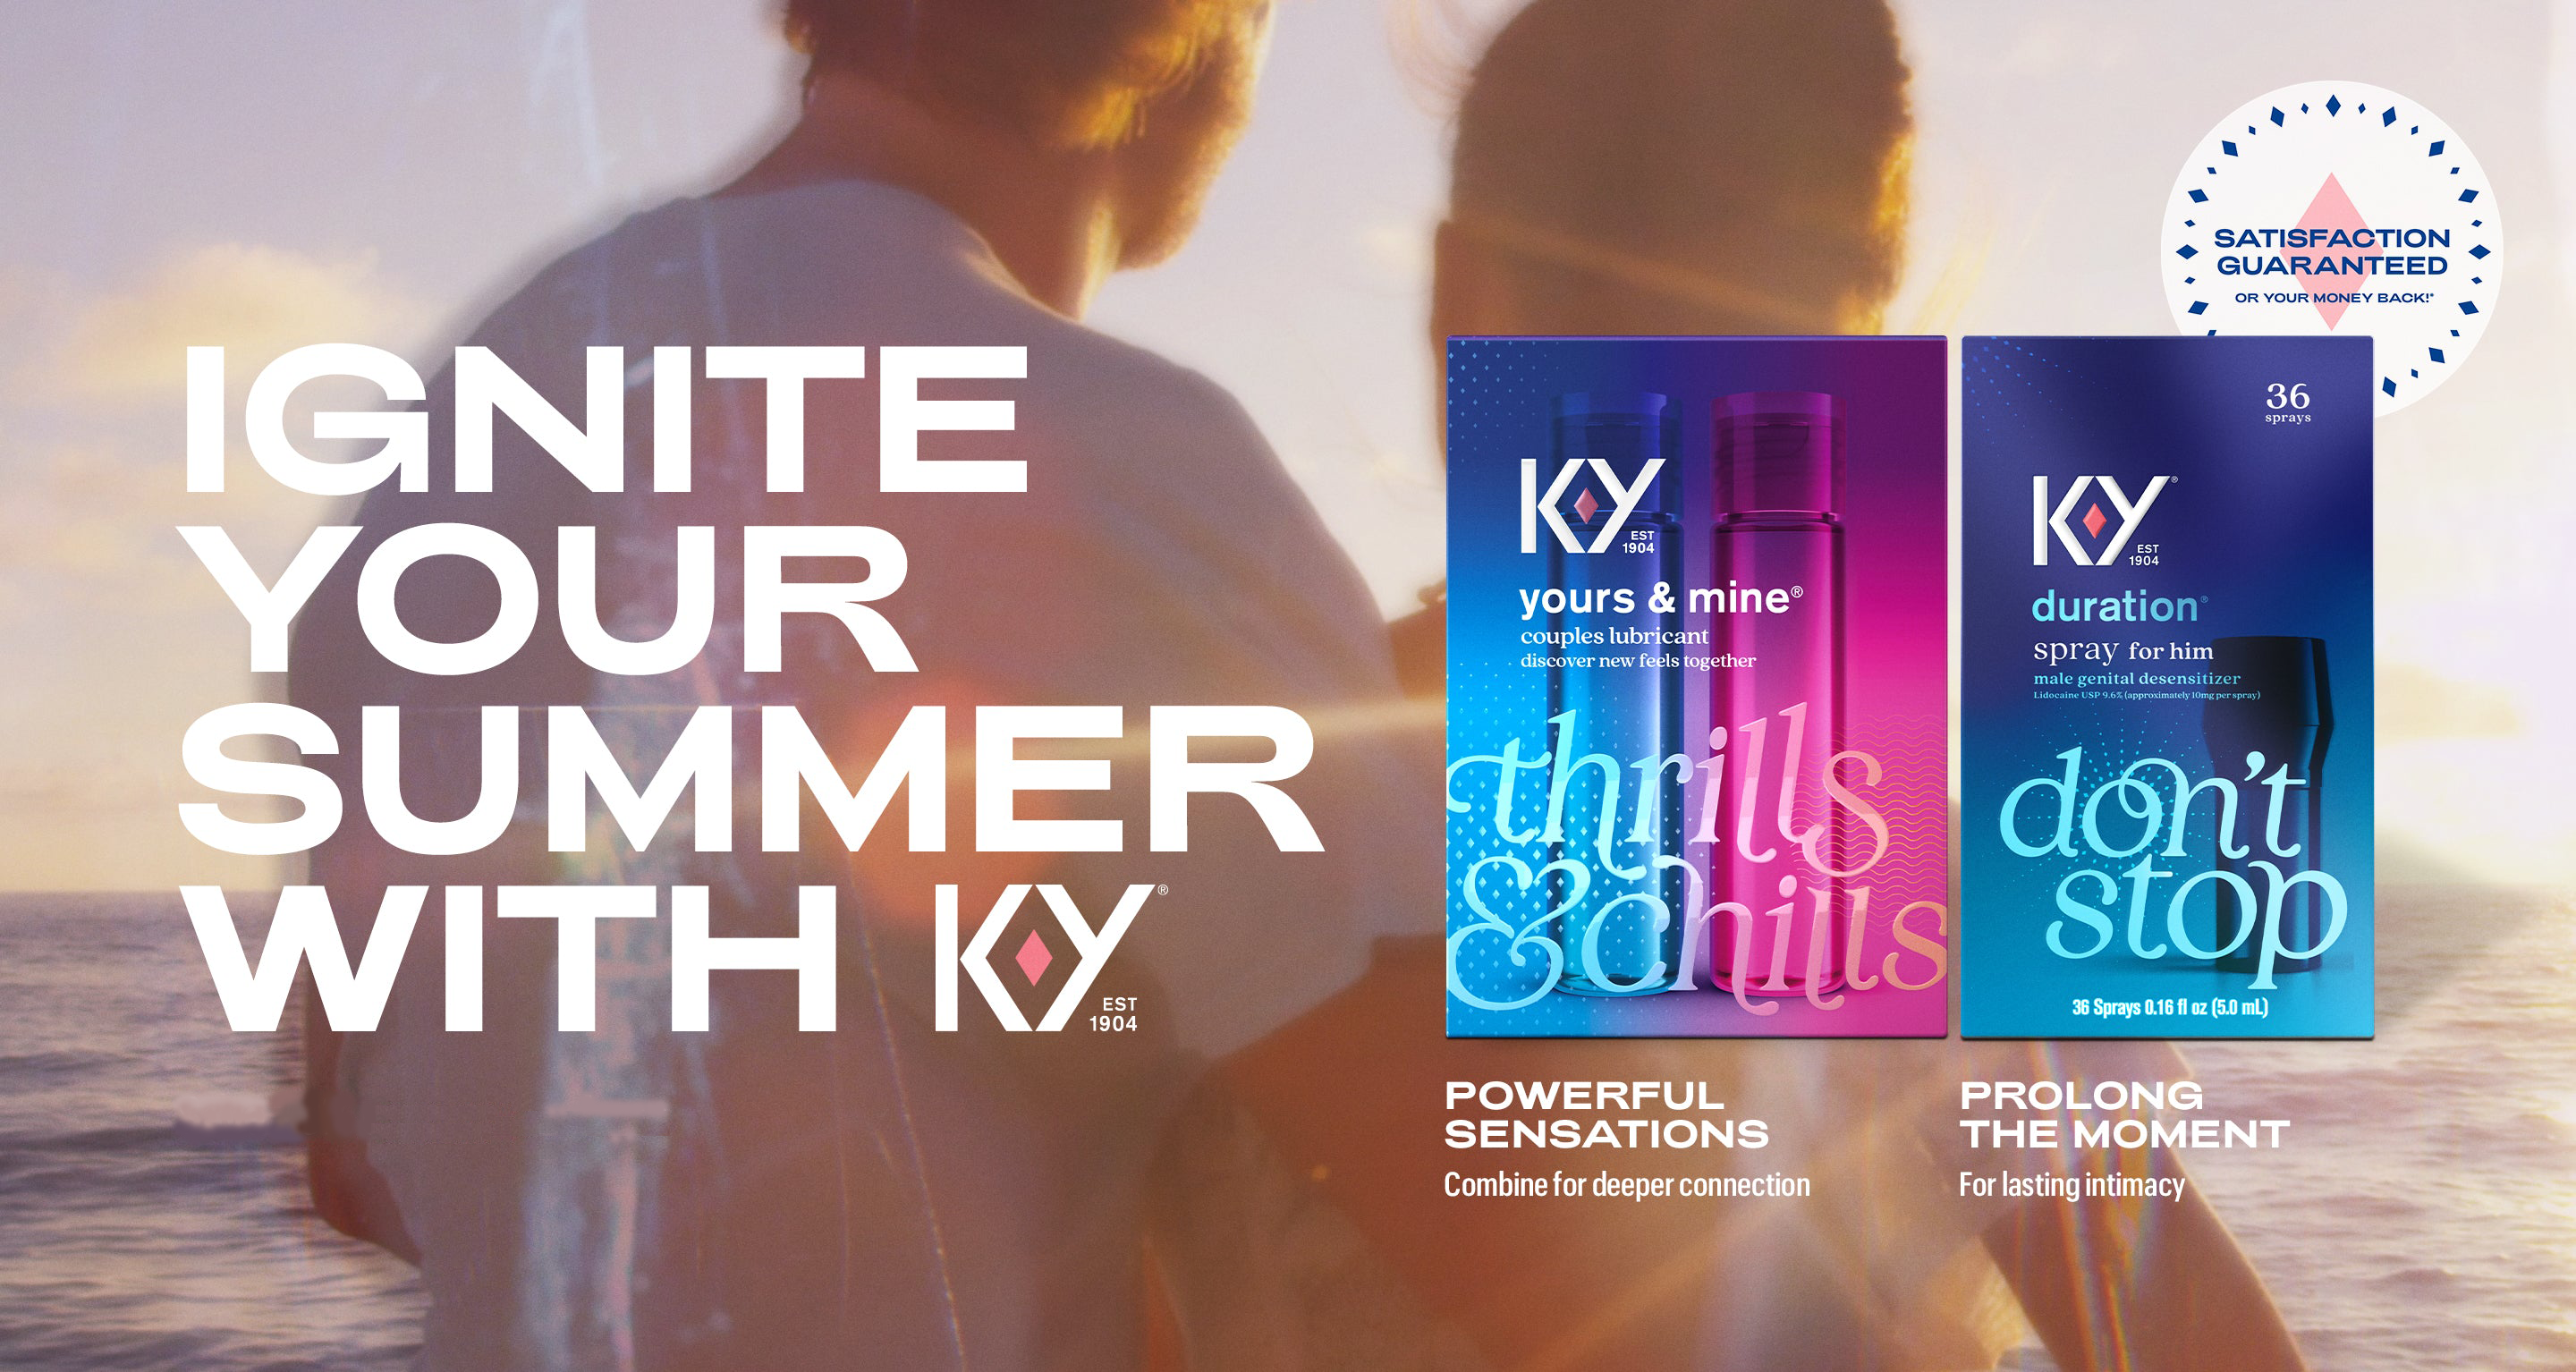 Ignite your summer with ky_banner Image